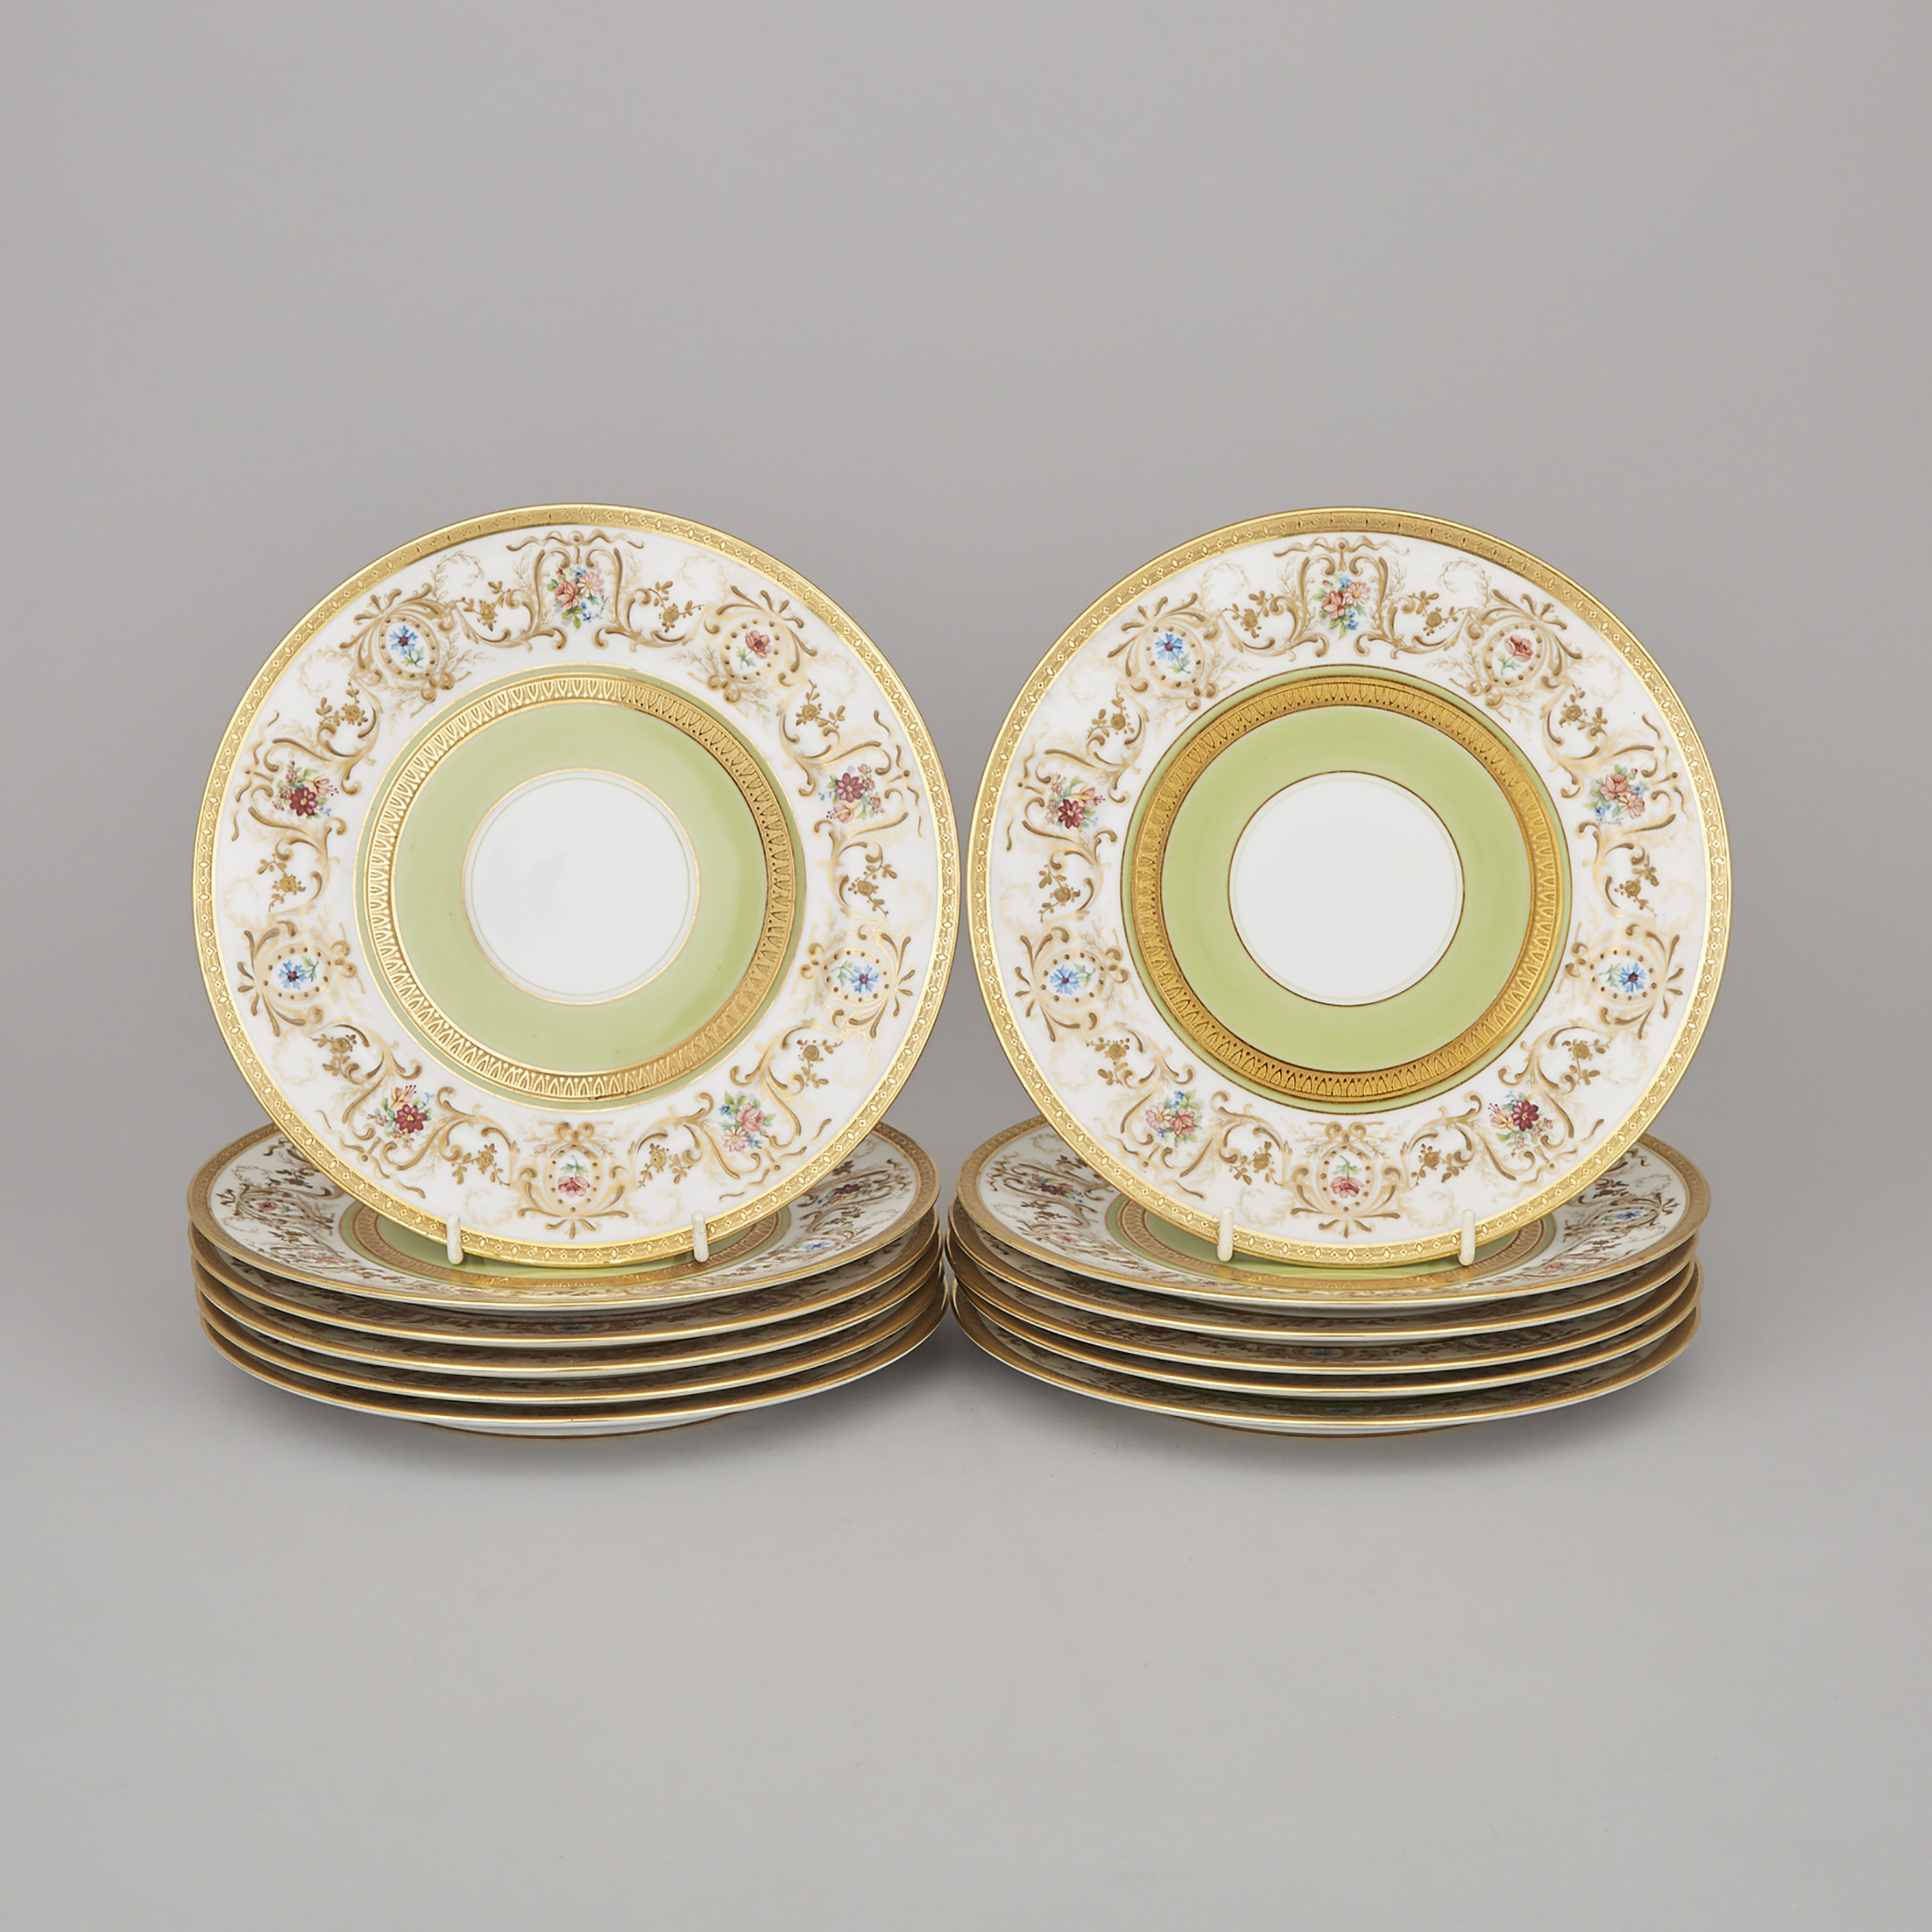 Twelve Charles Ahrenfeldt, Limoges Floral and Gilt Decorated and Apple Green Banded Dessert Plates, 20th century